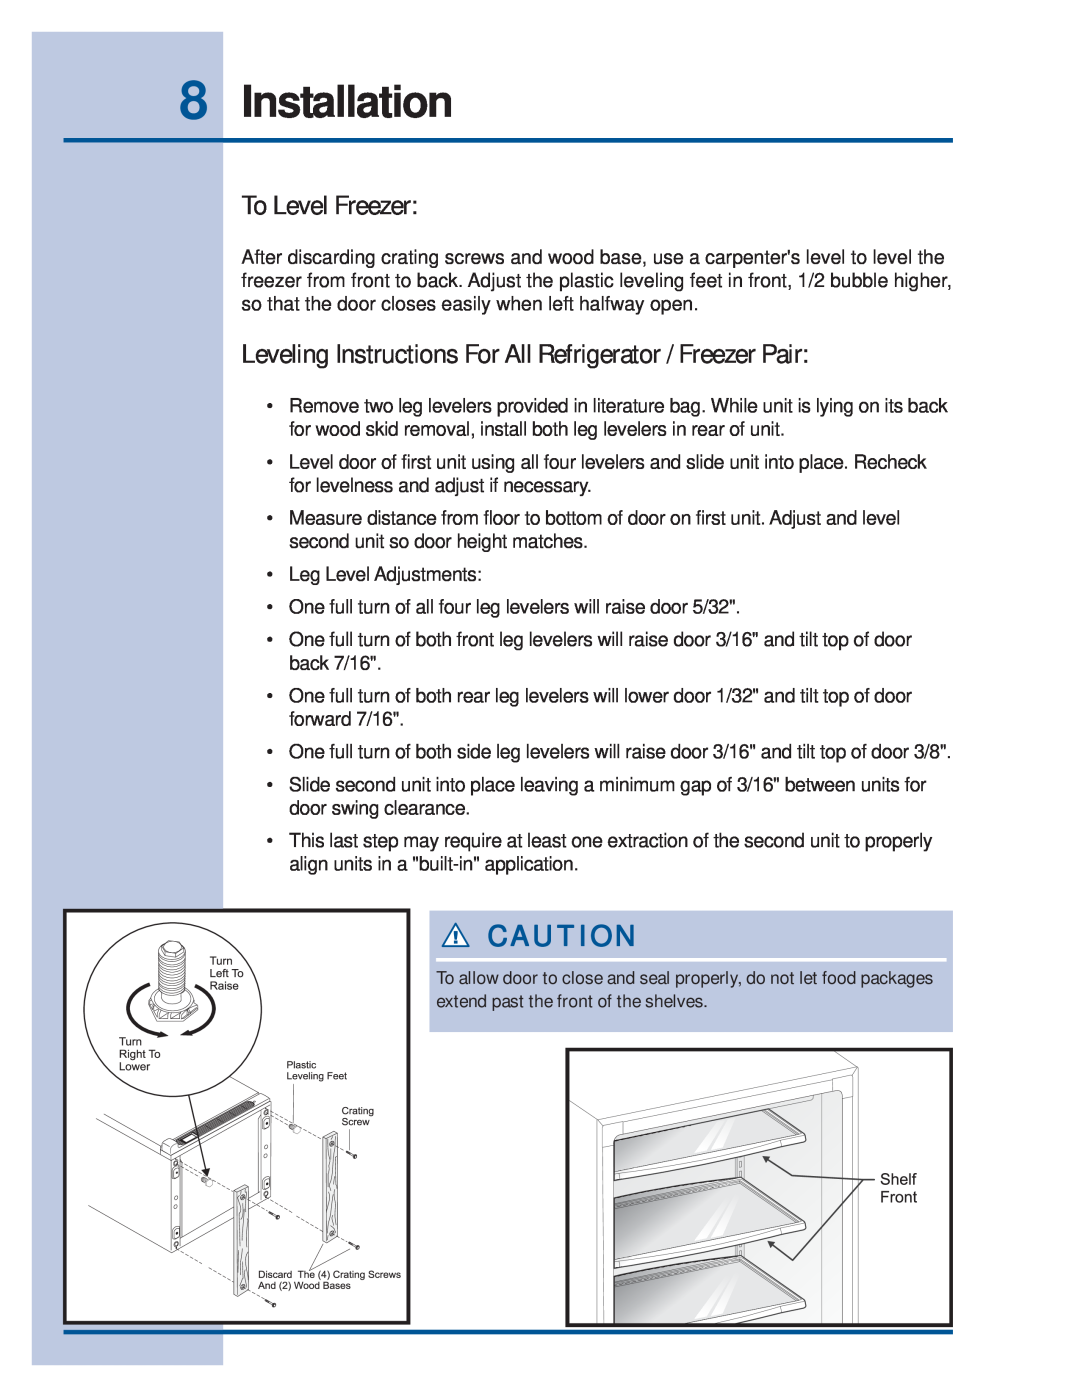 Electrolux manual To Level Freezer, Leveling Instructions For All Refrigerator / Freezer Pair, Installation 